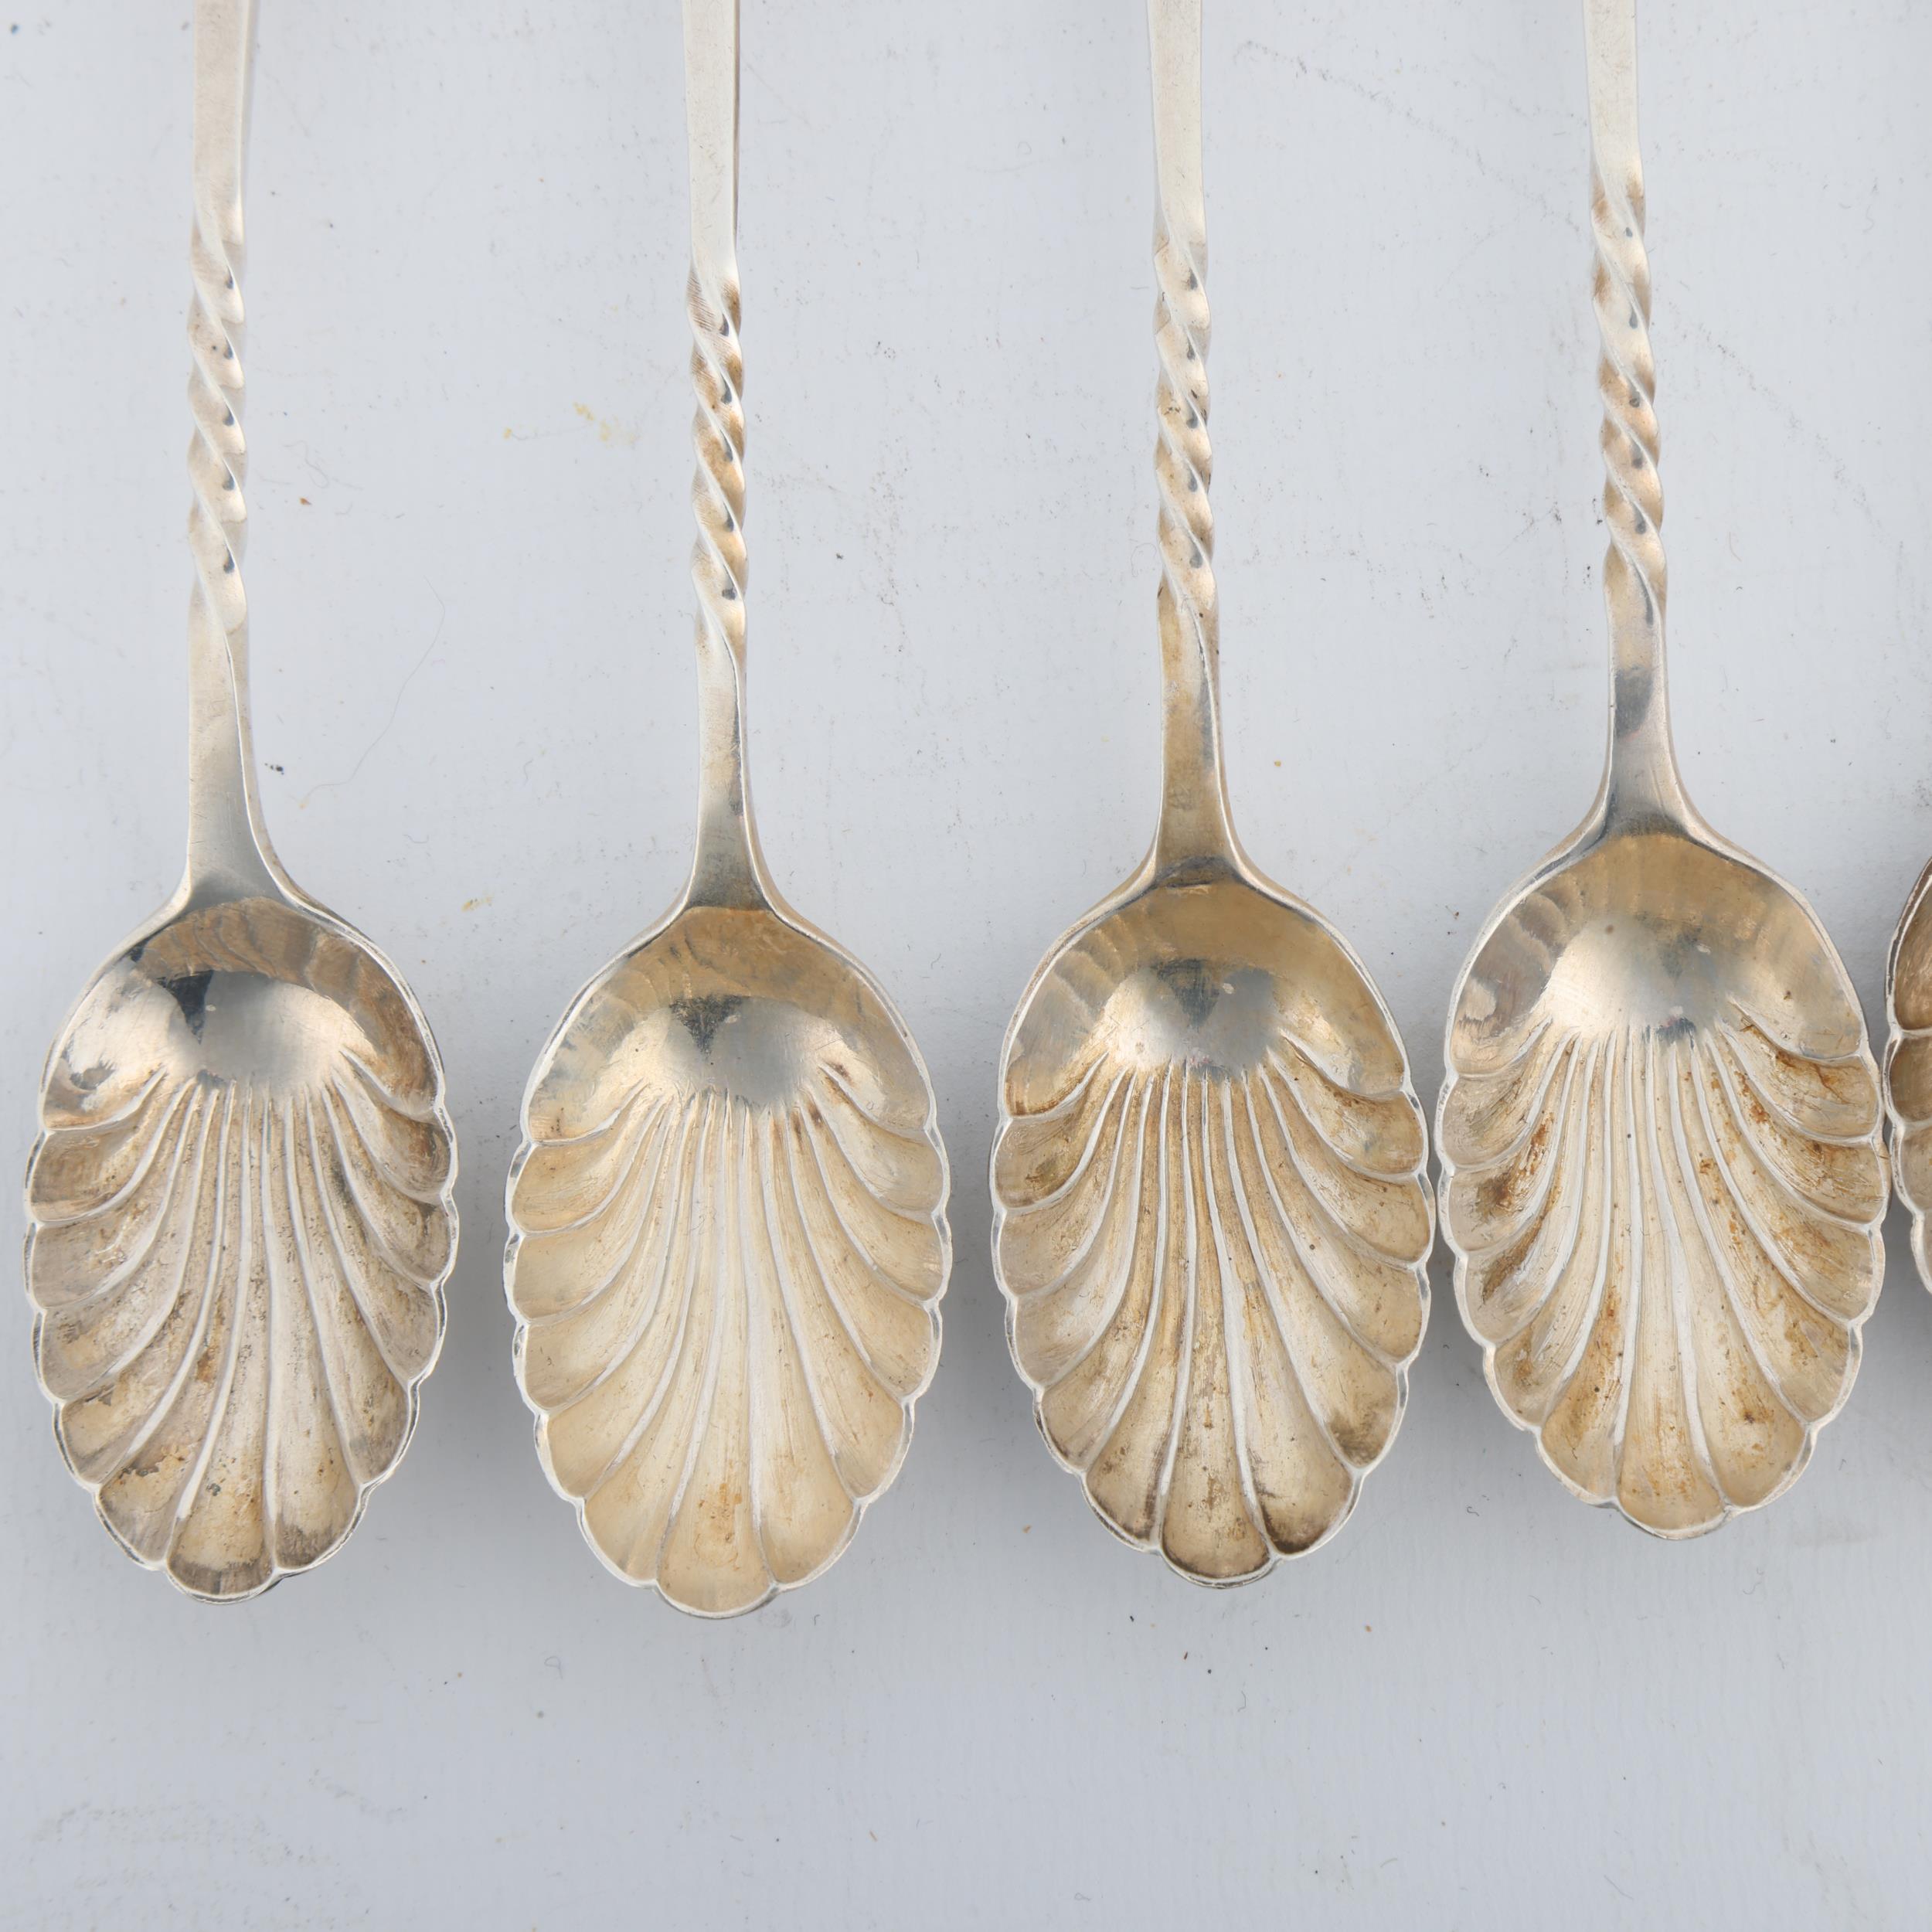 A set of 6 Edwardian silver shell teaspoons, Atkin Brothers, Sheffield 1902, 11.5cm, 2.7oz total - Image 2 of 3